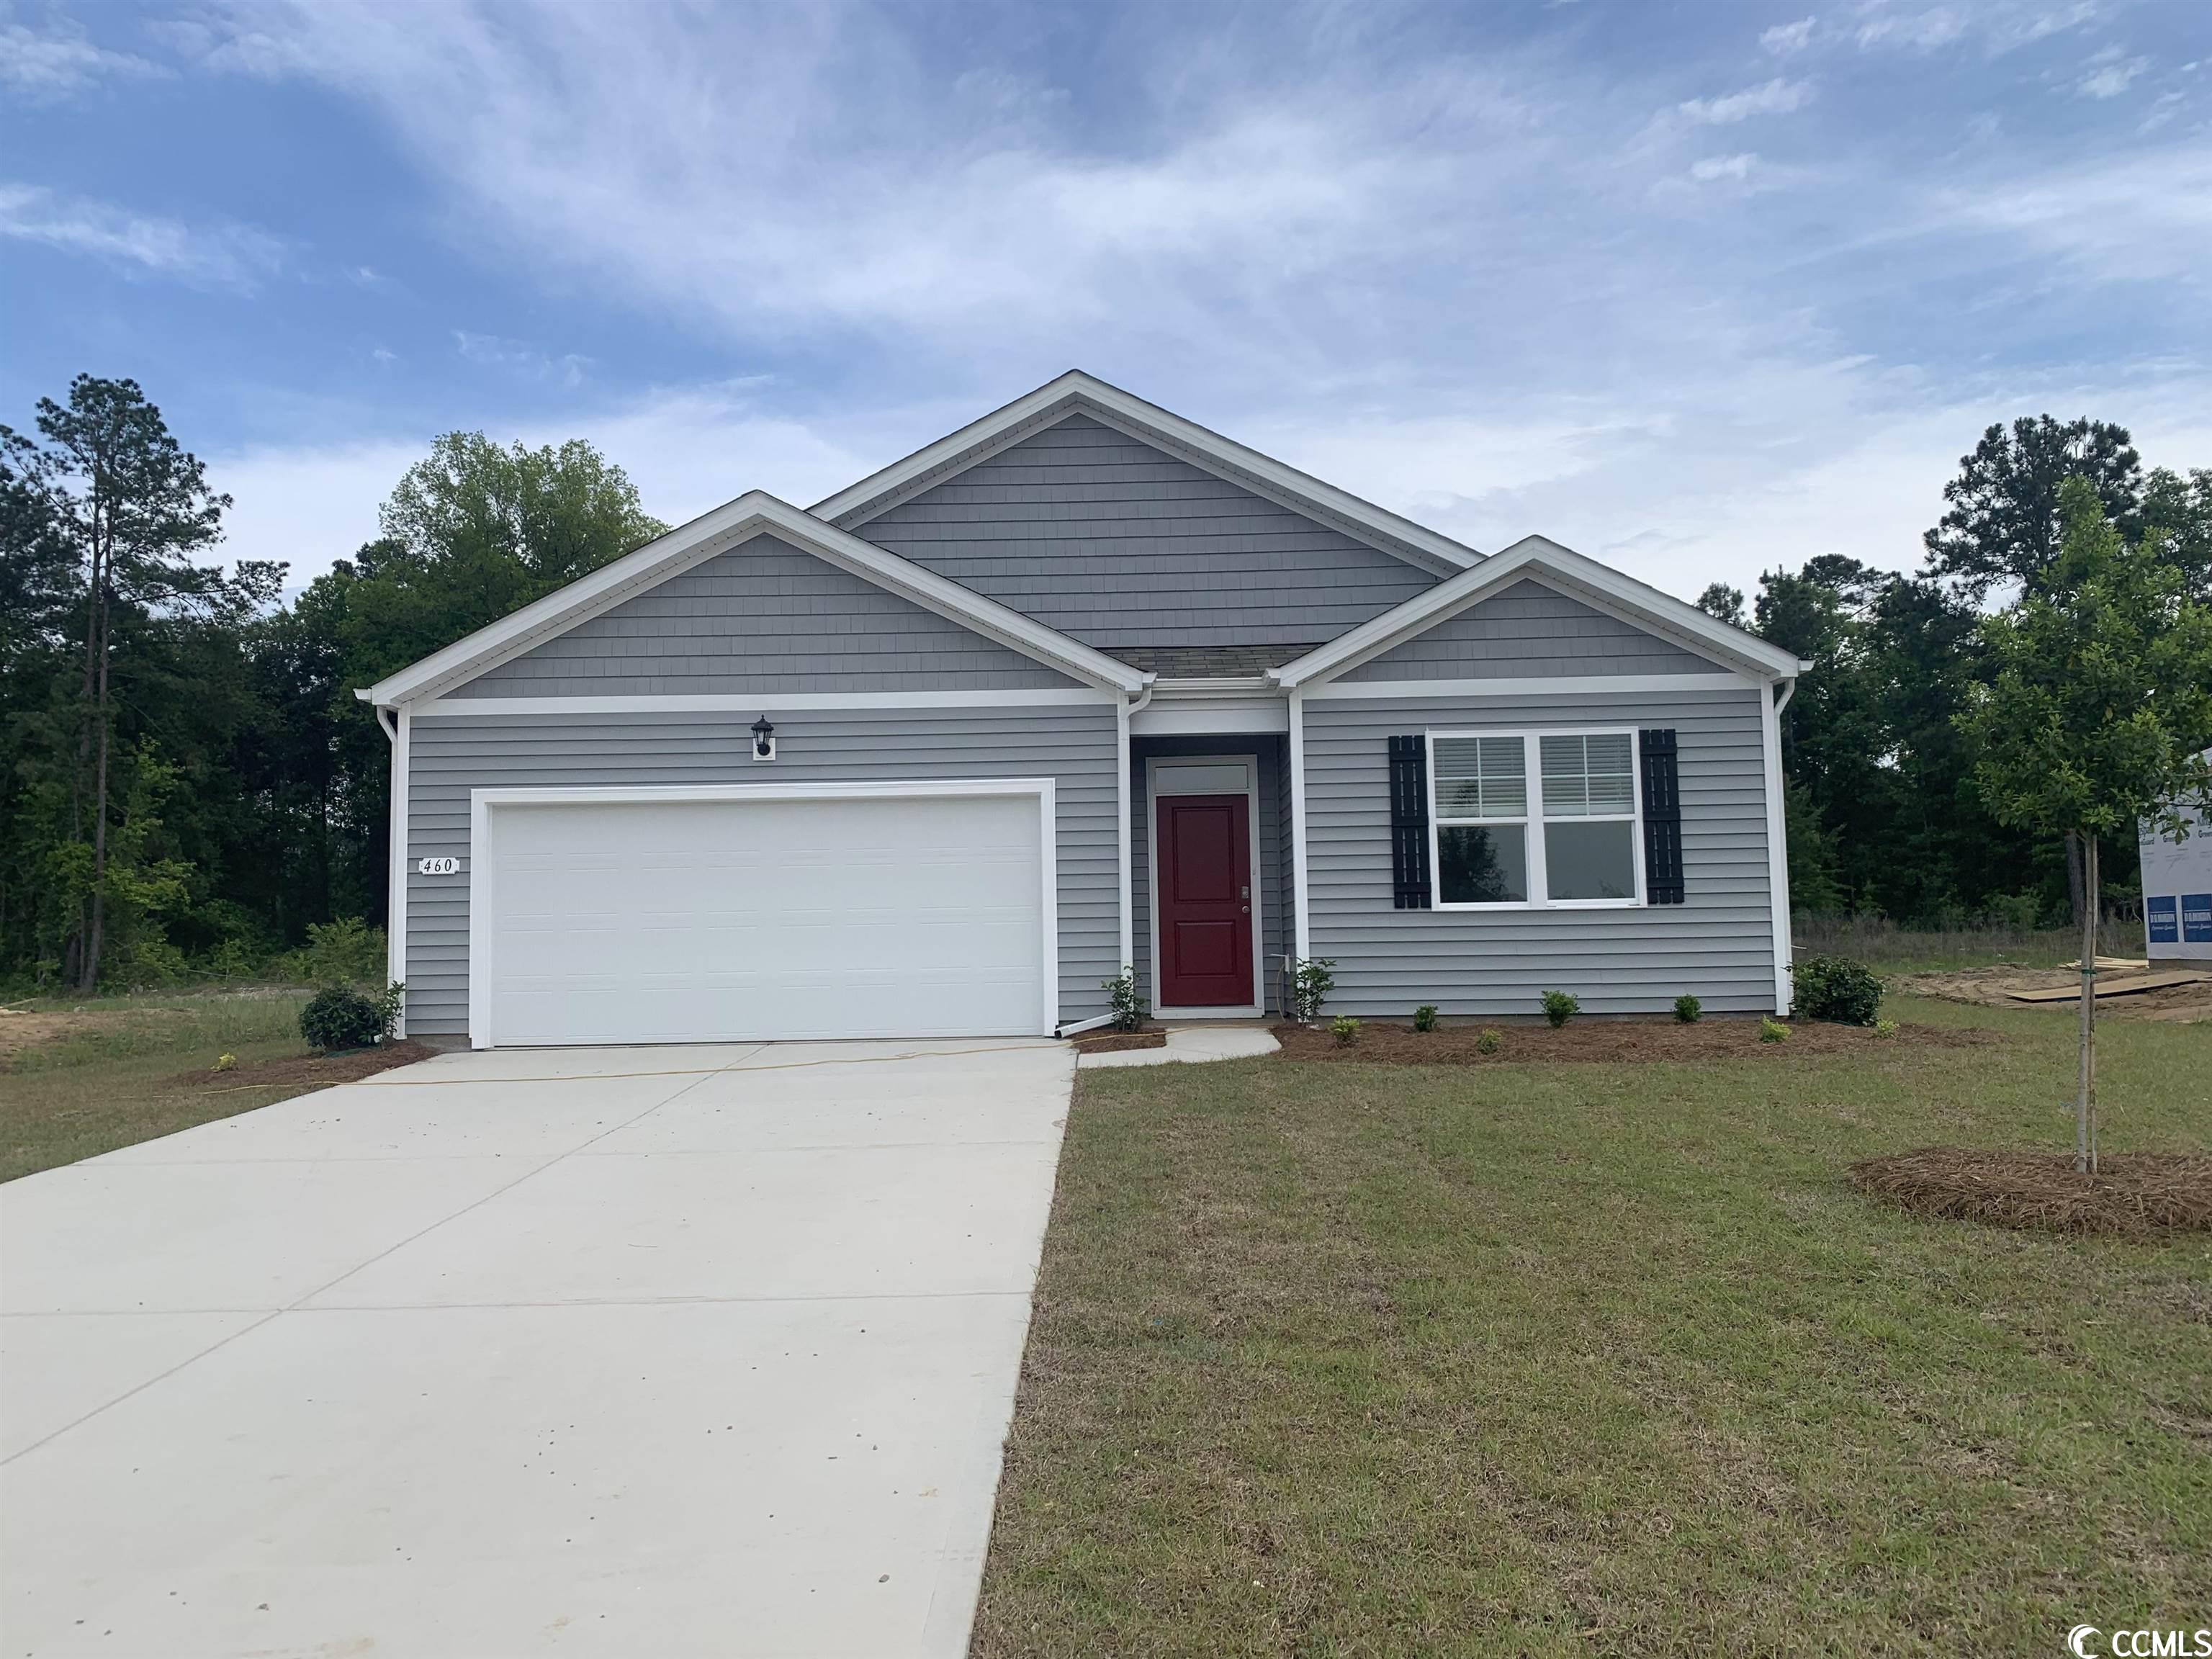 460 Royal Arch Dr. Conway, SC 29526